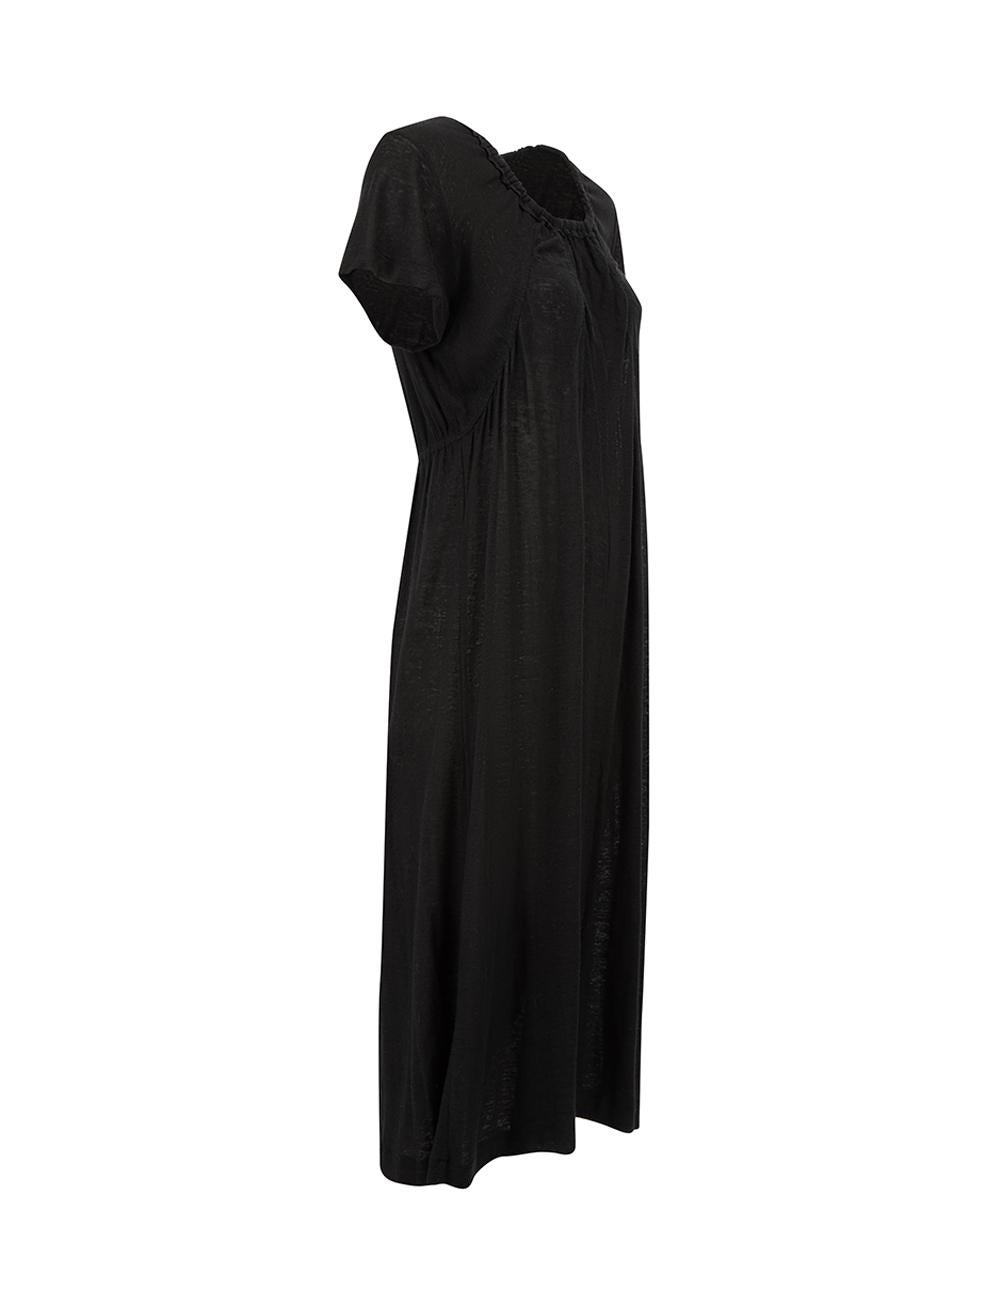 CONDITION is Very good. Minimal wear to dress is evident. Minimal wear to fabric with some pilling to be seen throughout on this used Y's designer resale item.



Details


Black

Linen

Midi dress

Ruched elasticated neckline

Short sleeves

Round